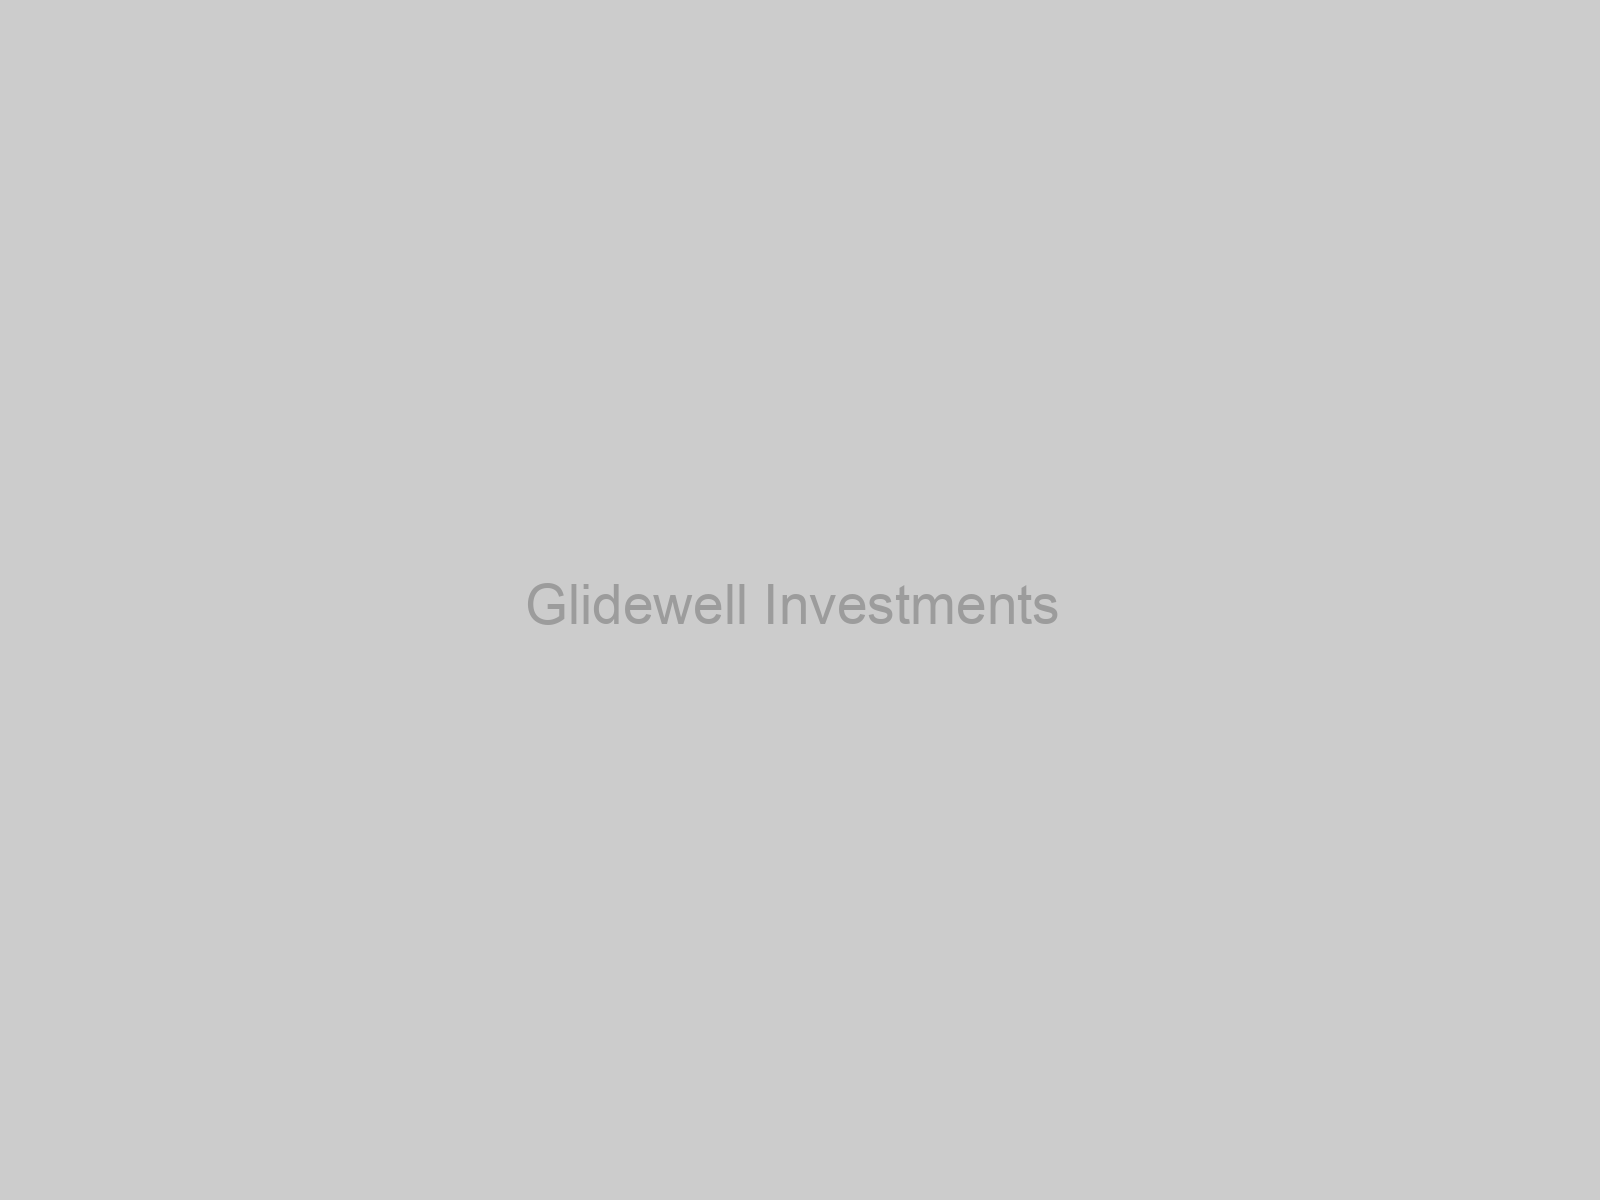 Glidewell Investments & Insurance Group (GiiG)